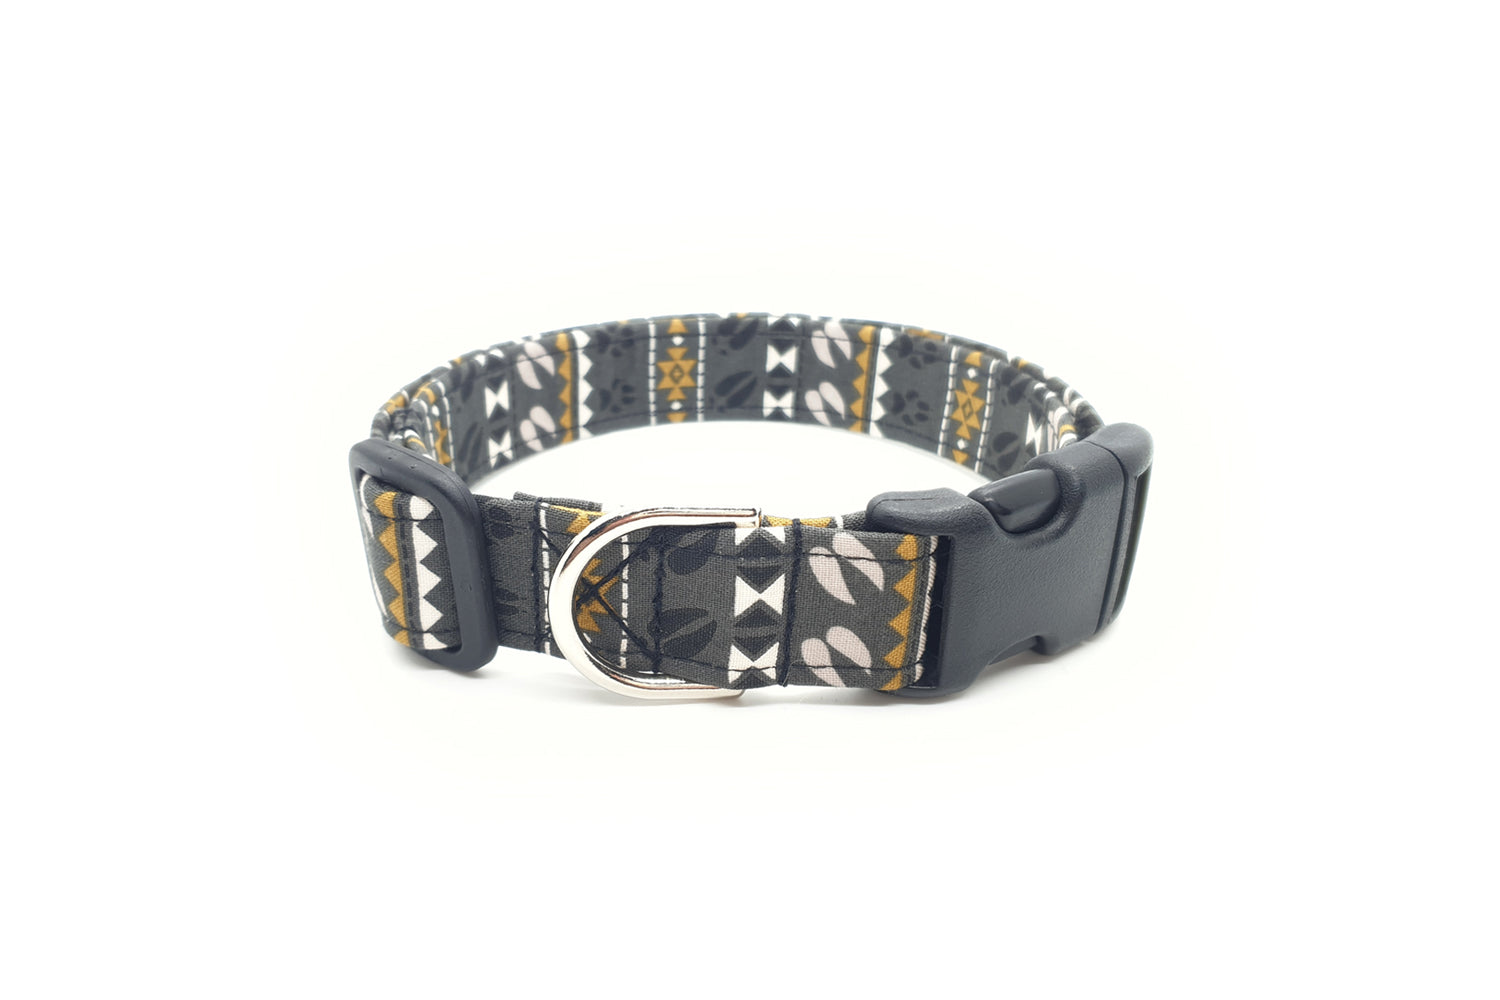 Gray Southwest Tribal Dog Collar with Black, White and Yellow Gold Accents and Animal Tracks - Handmade by Kira's Pet Shop